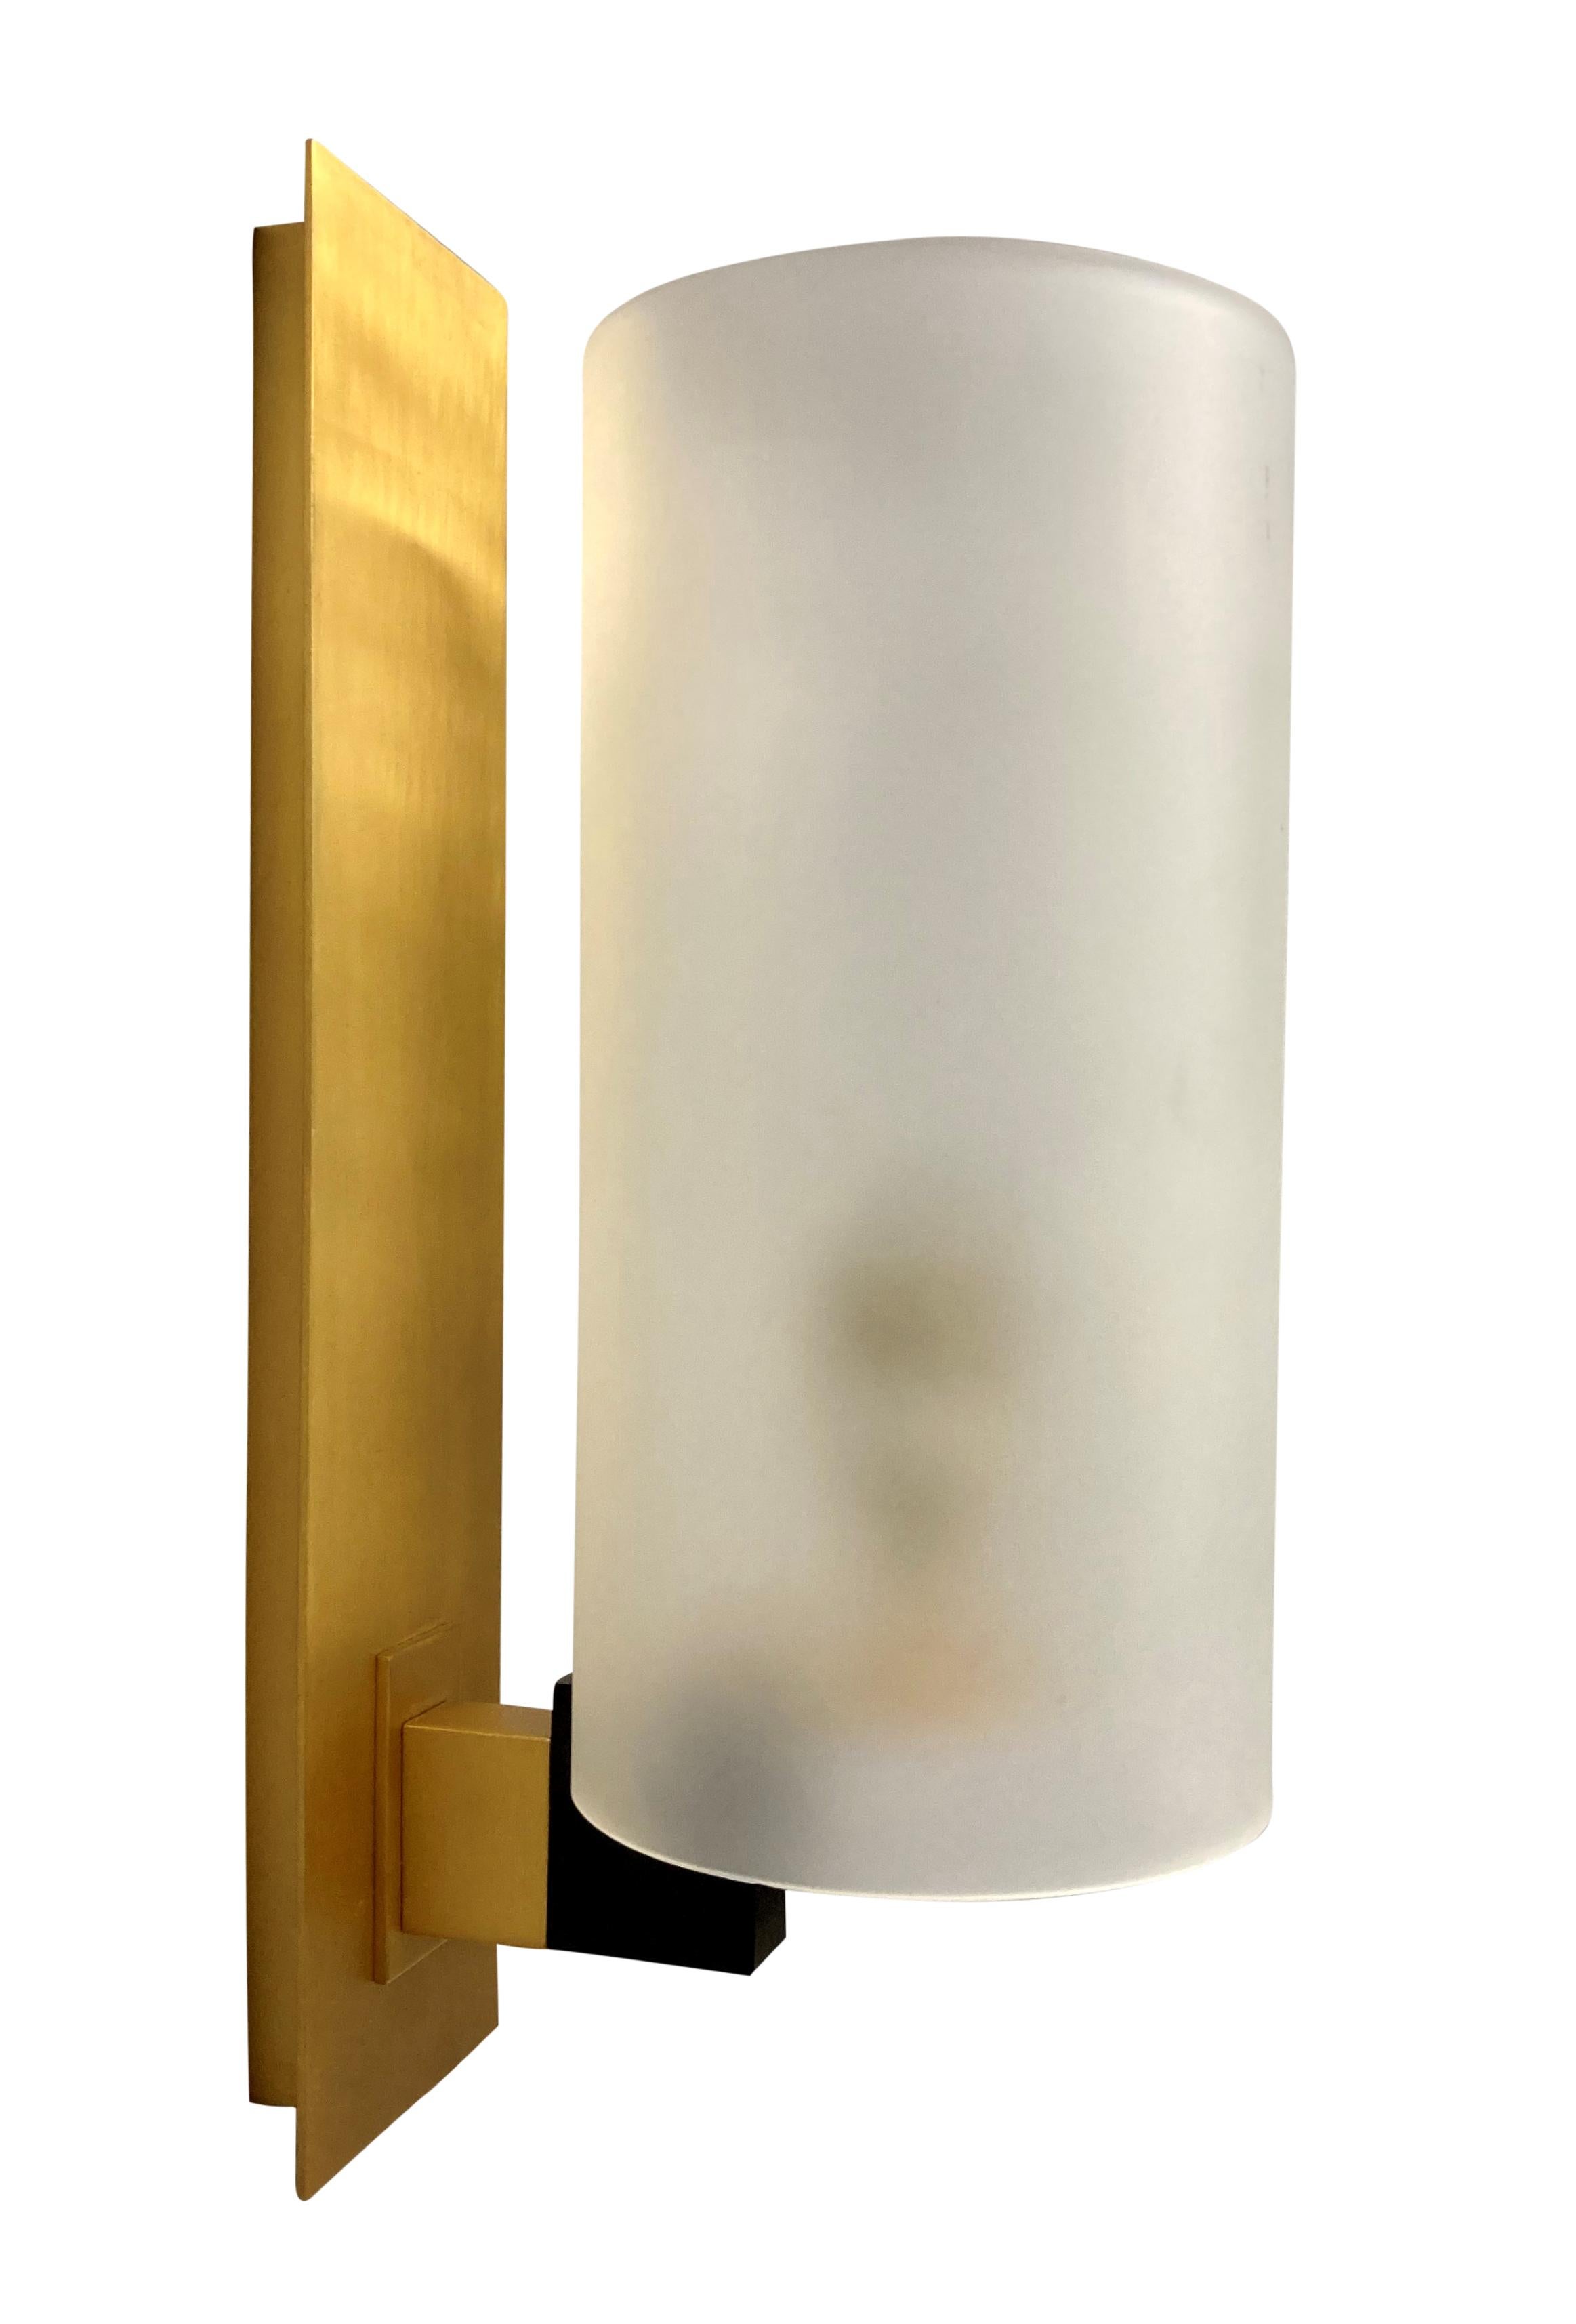 Italian Pair Of Midcentury Brushed Brass & Frosted Glass Wall Sconces For Sale